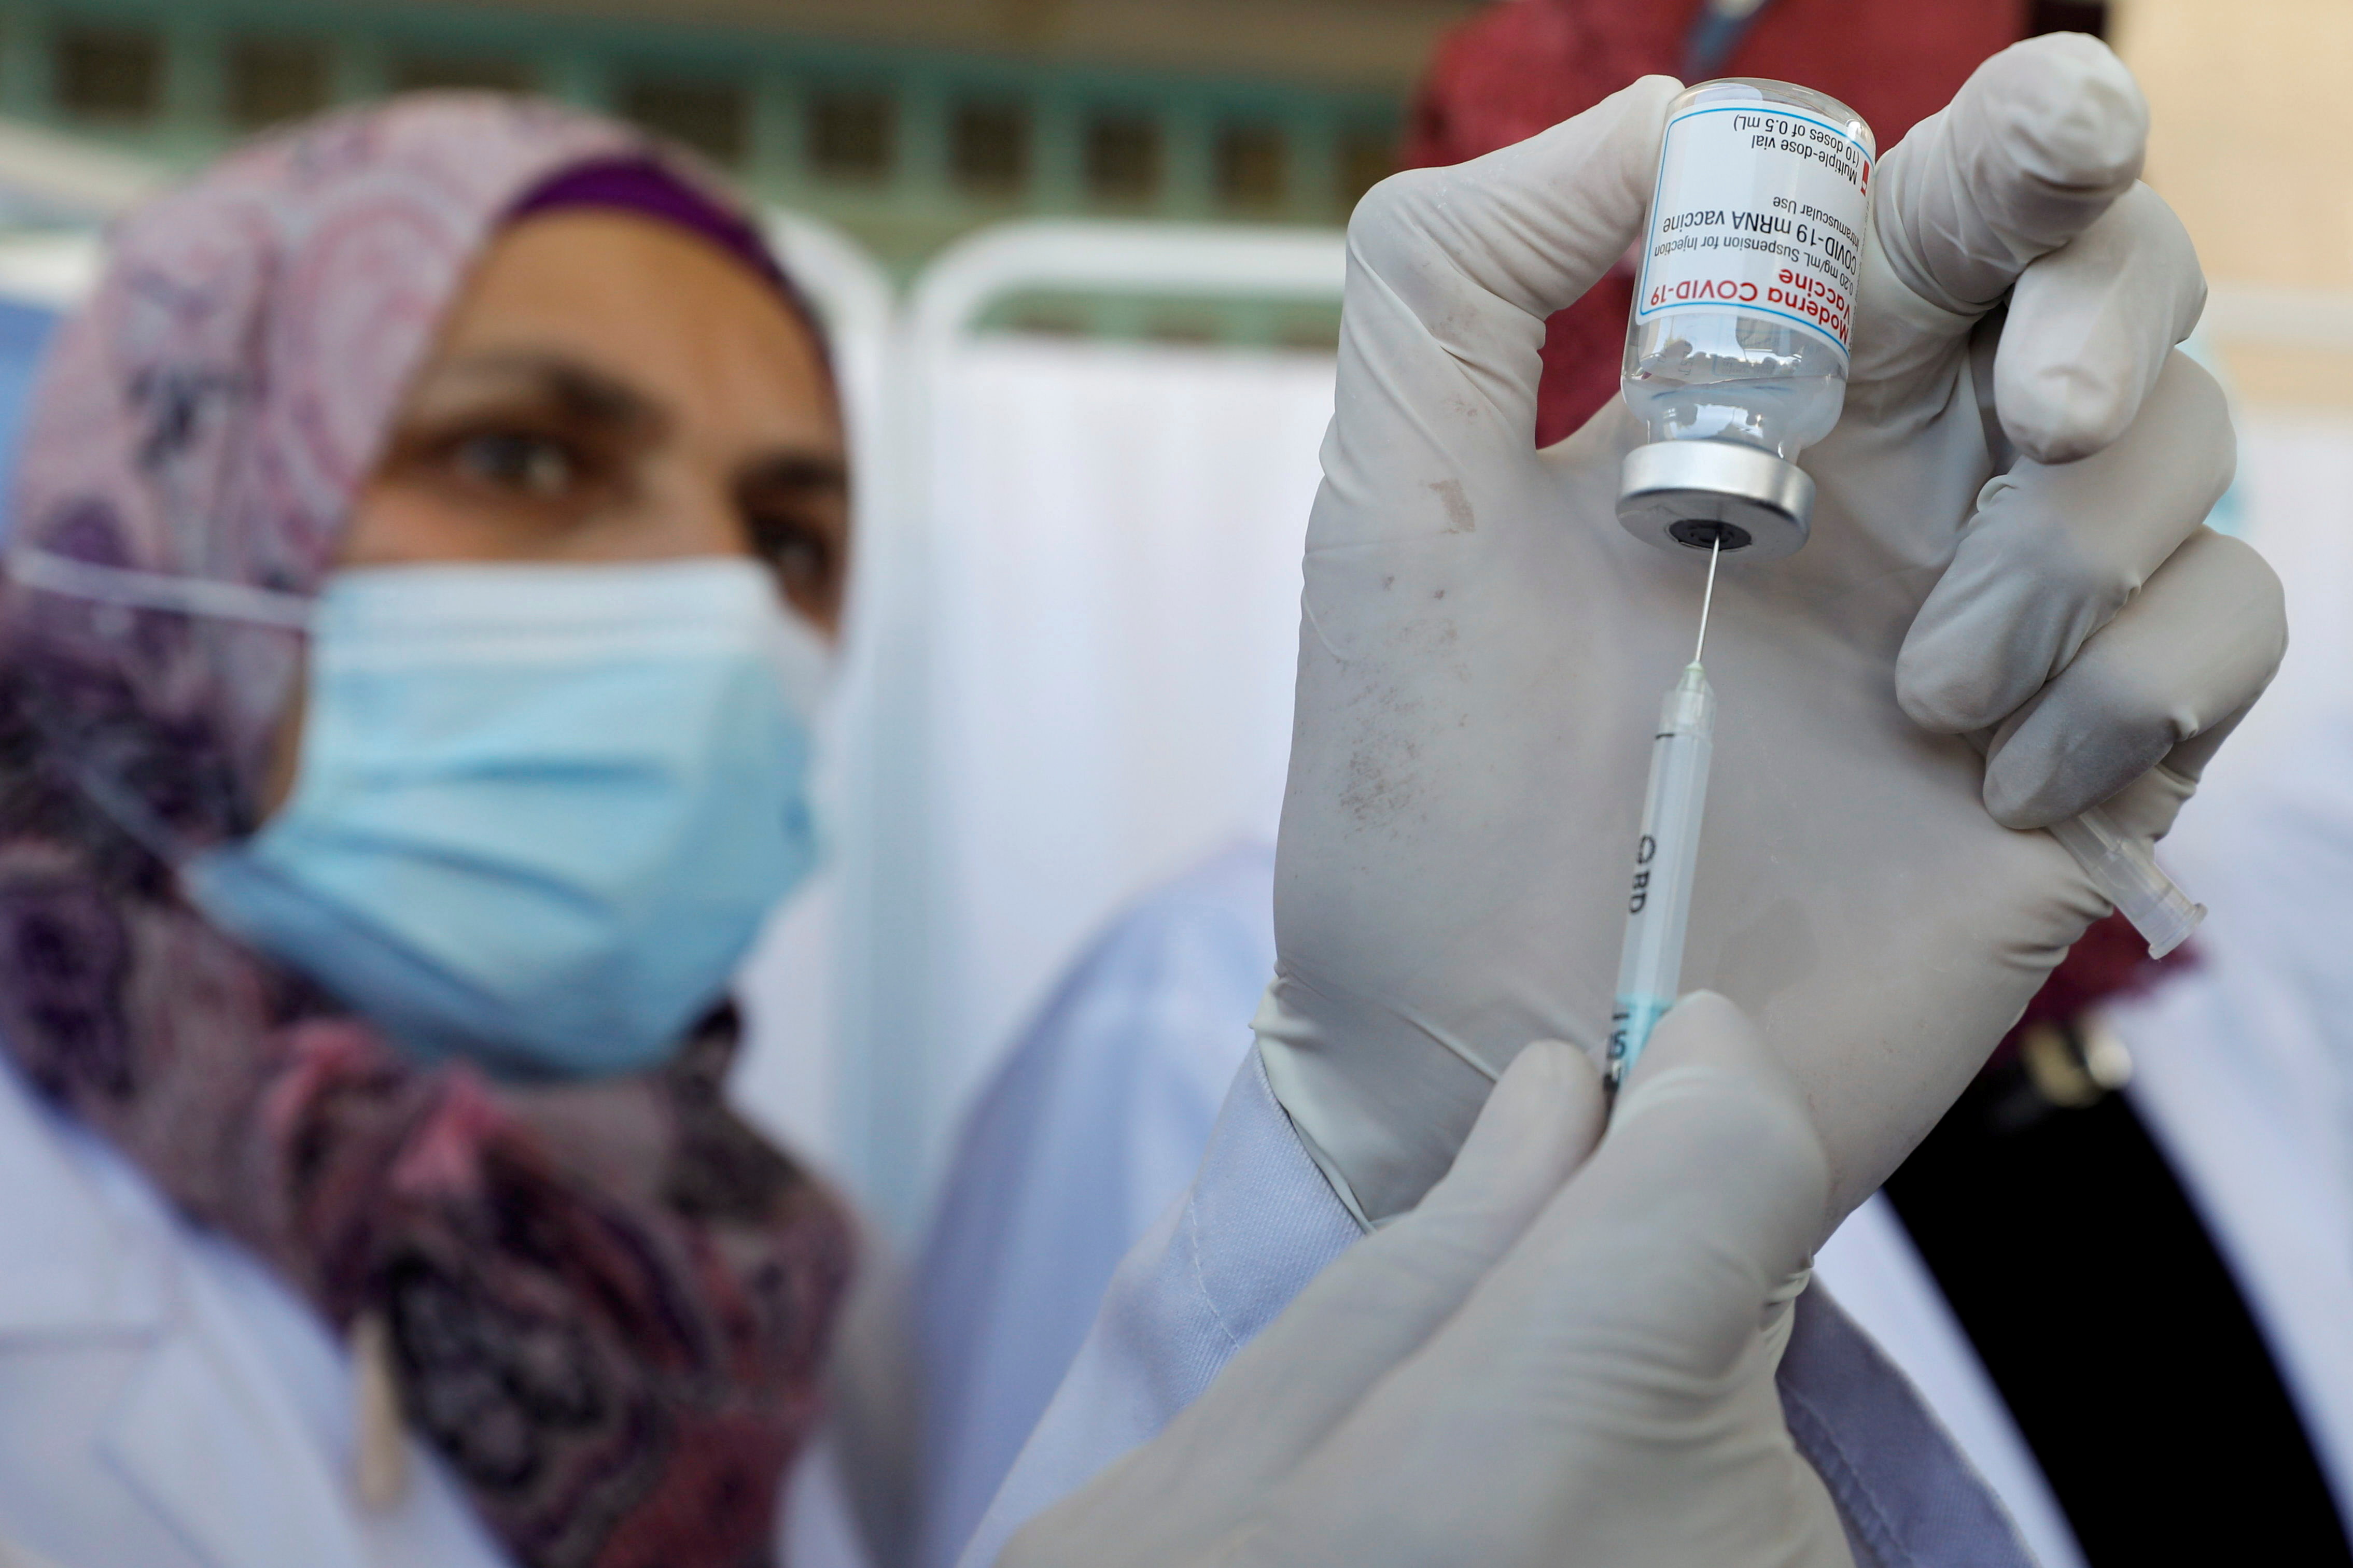 Palestinian health workers are vaccinated against COVID-19 in Bethlehem